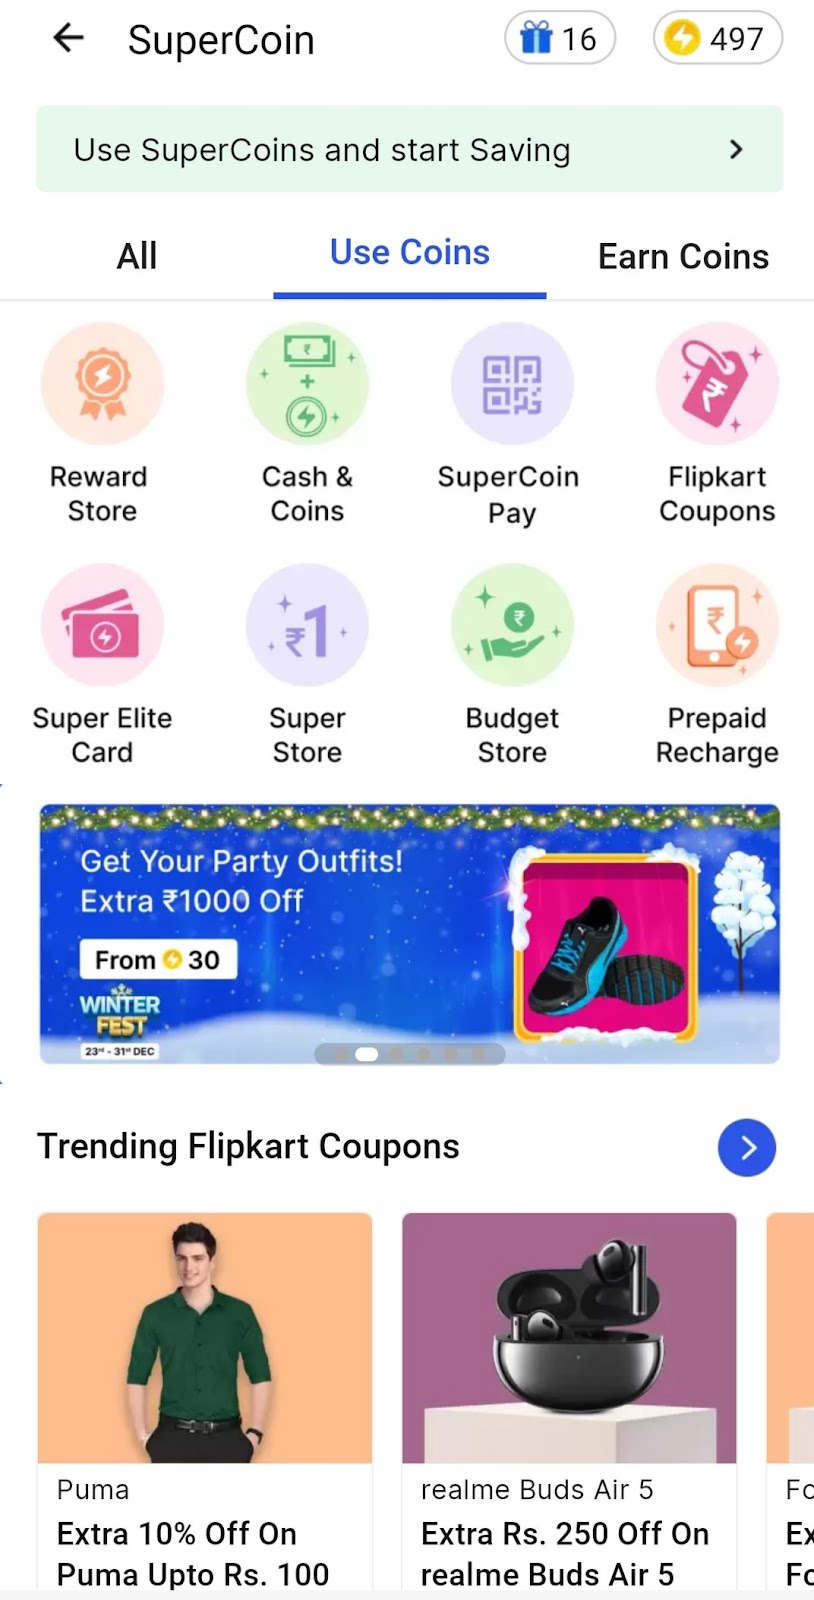 #4 How to get a Free Pocket FM Promo Code From Flipkart?